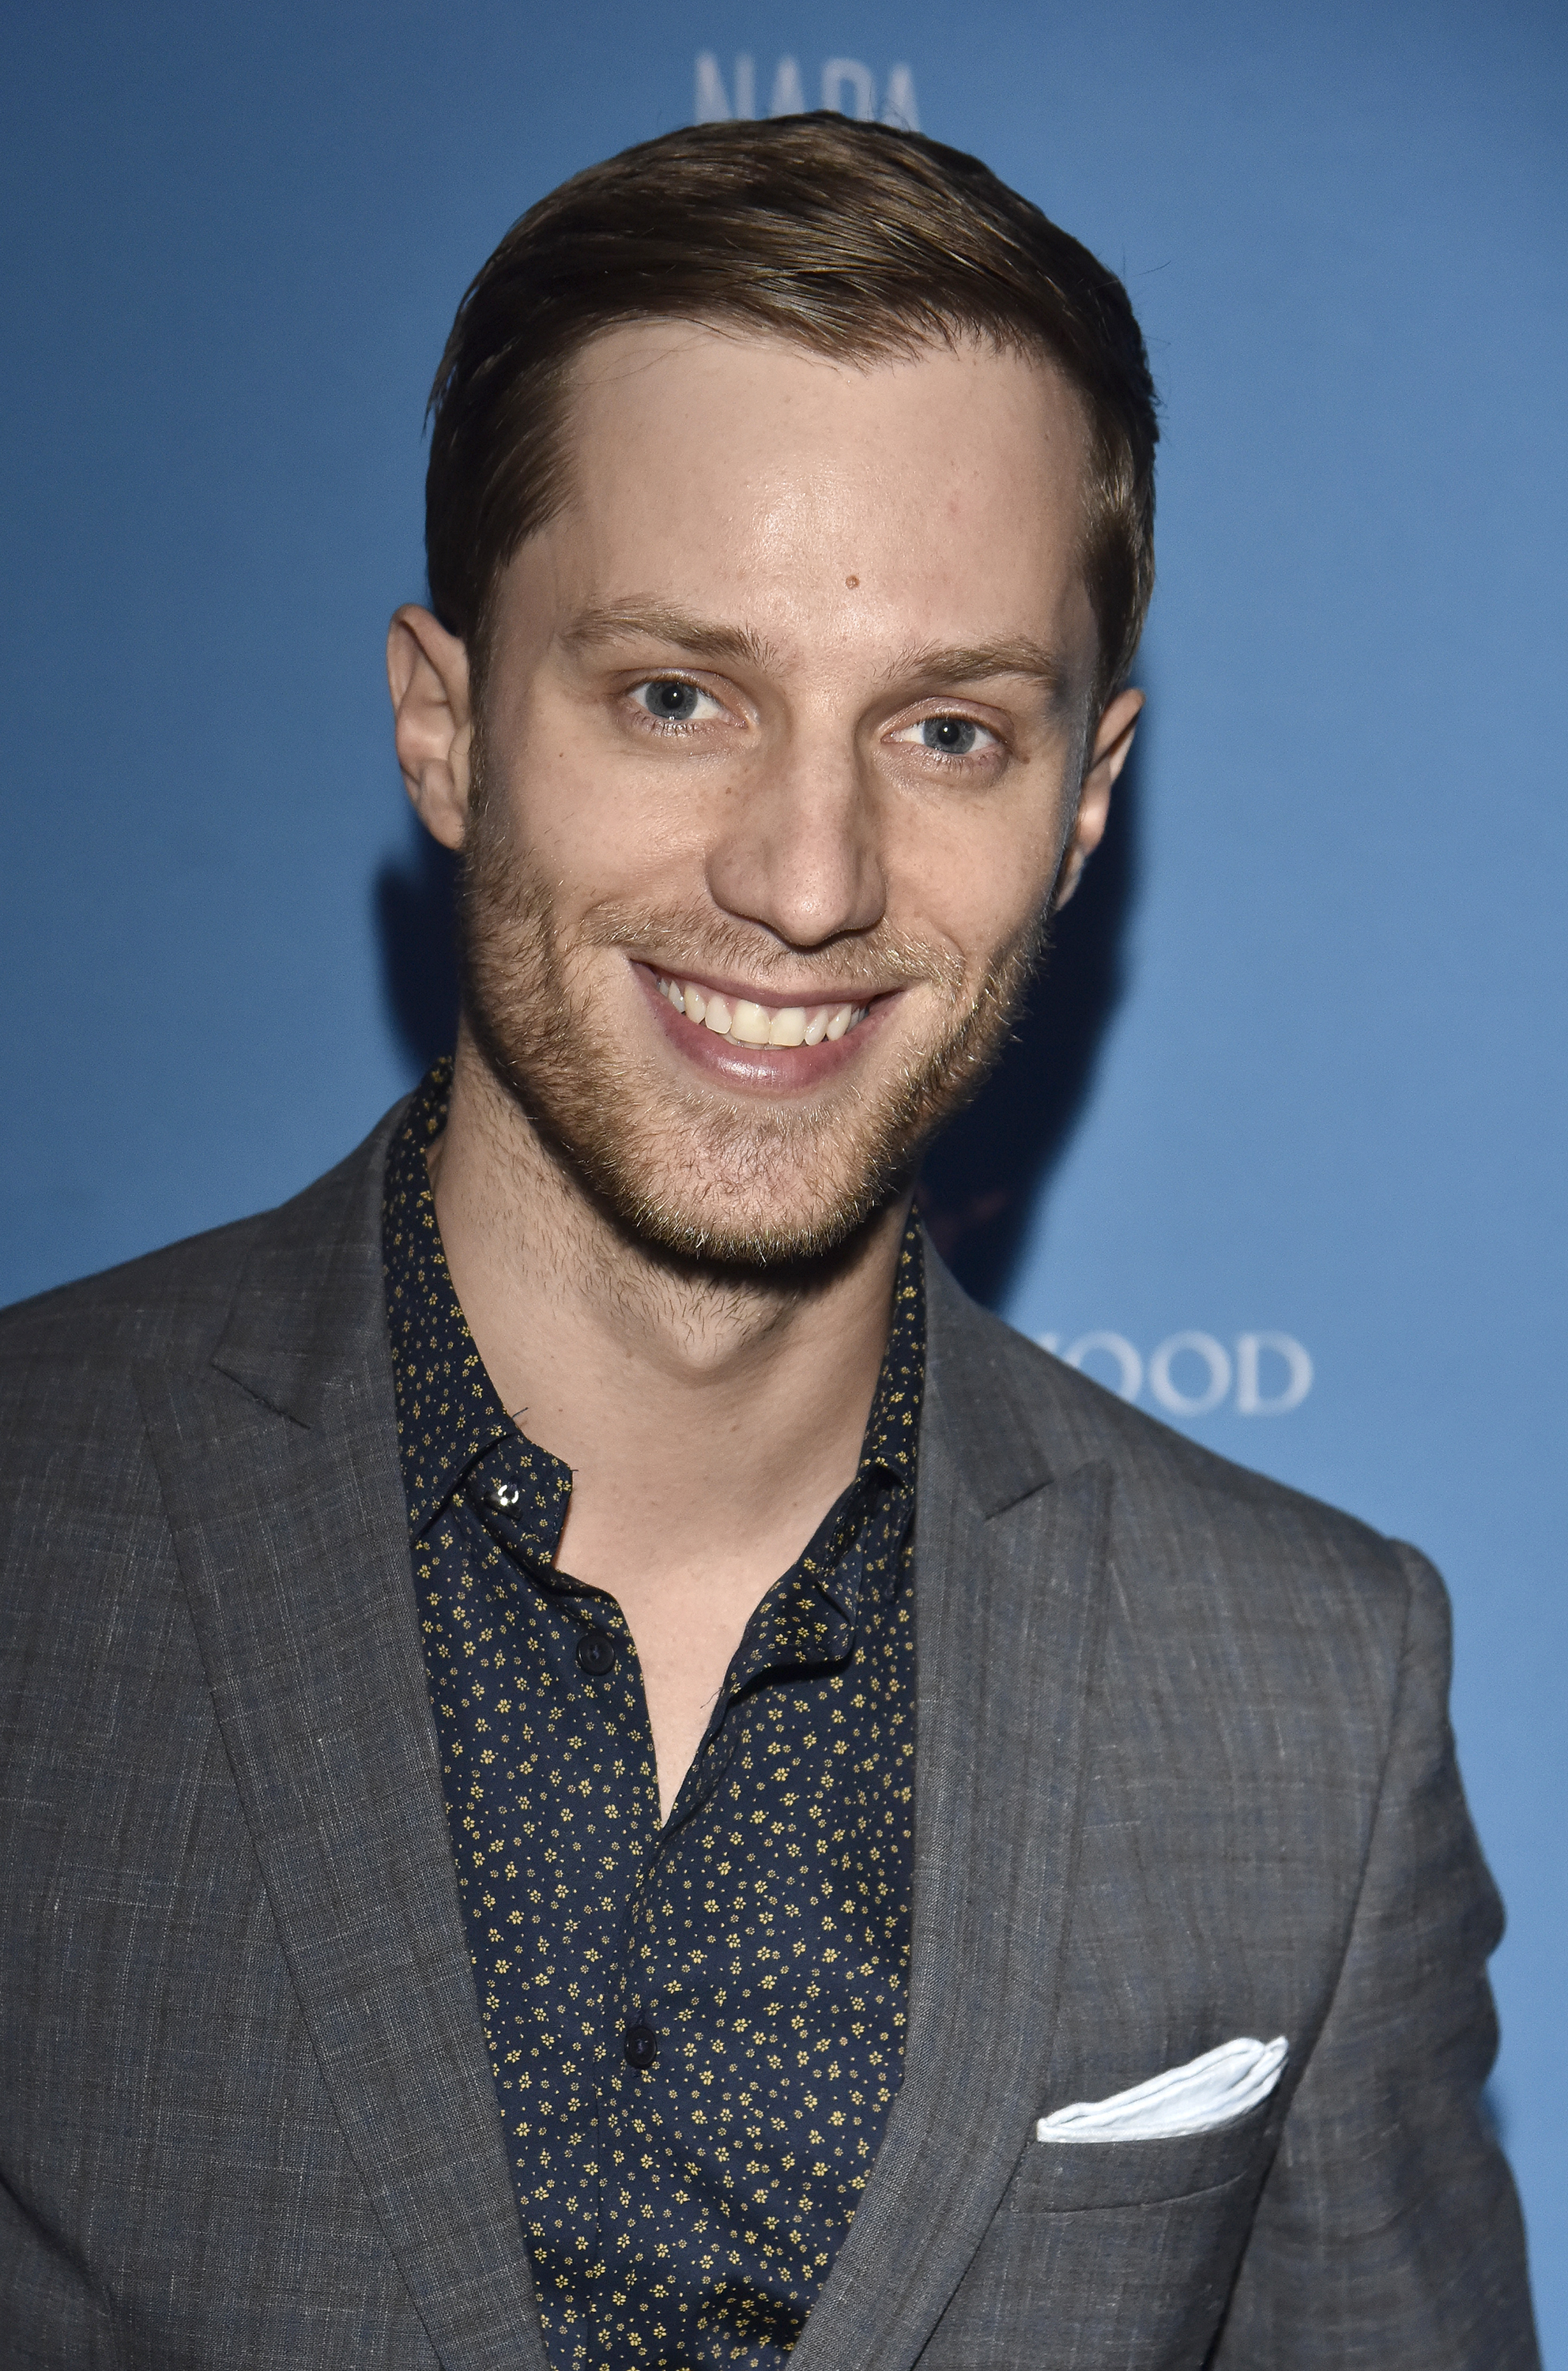 Jonathan Keltz at the opening night of the Napa Film Festival on November 13, 2019, in Napa, California. | Source: Getty Images